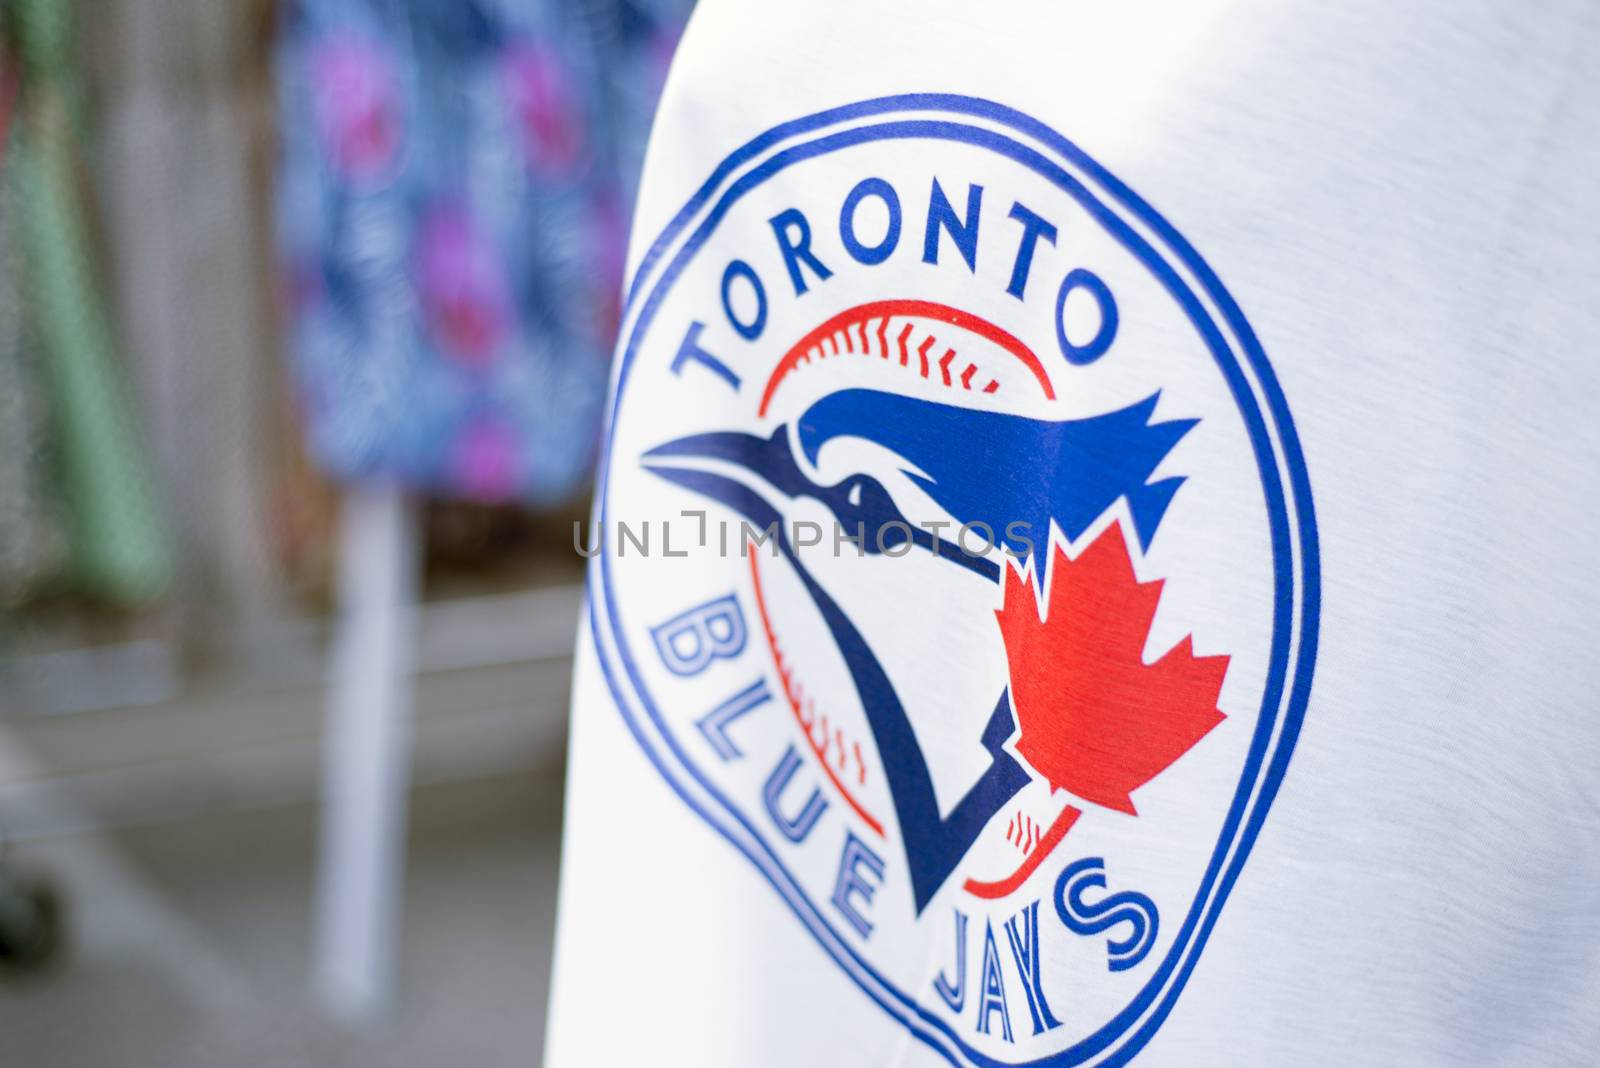 TORONTO,CANADA-July 22,2015: Detail of Blue Jays memorabilia selling outside the stadium. The Toronto Blue Jays are a professional baseball team located in Toronto, Canada. Members of the Eastern Division of MLB